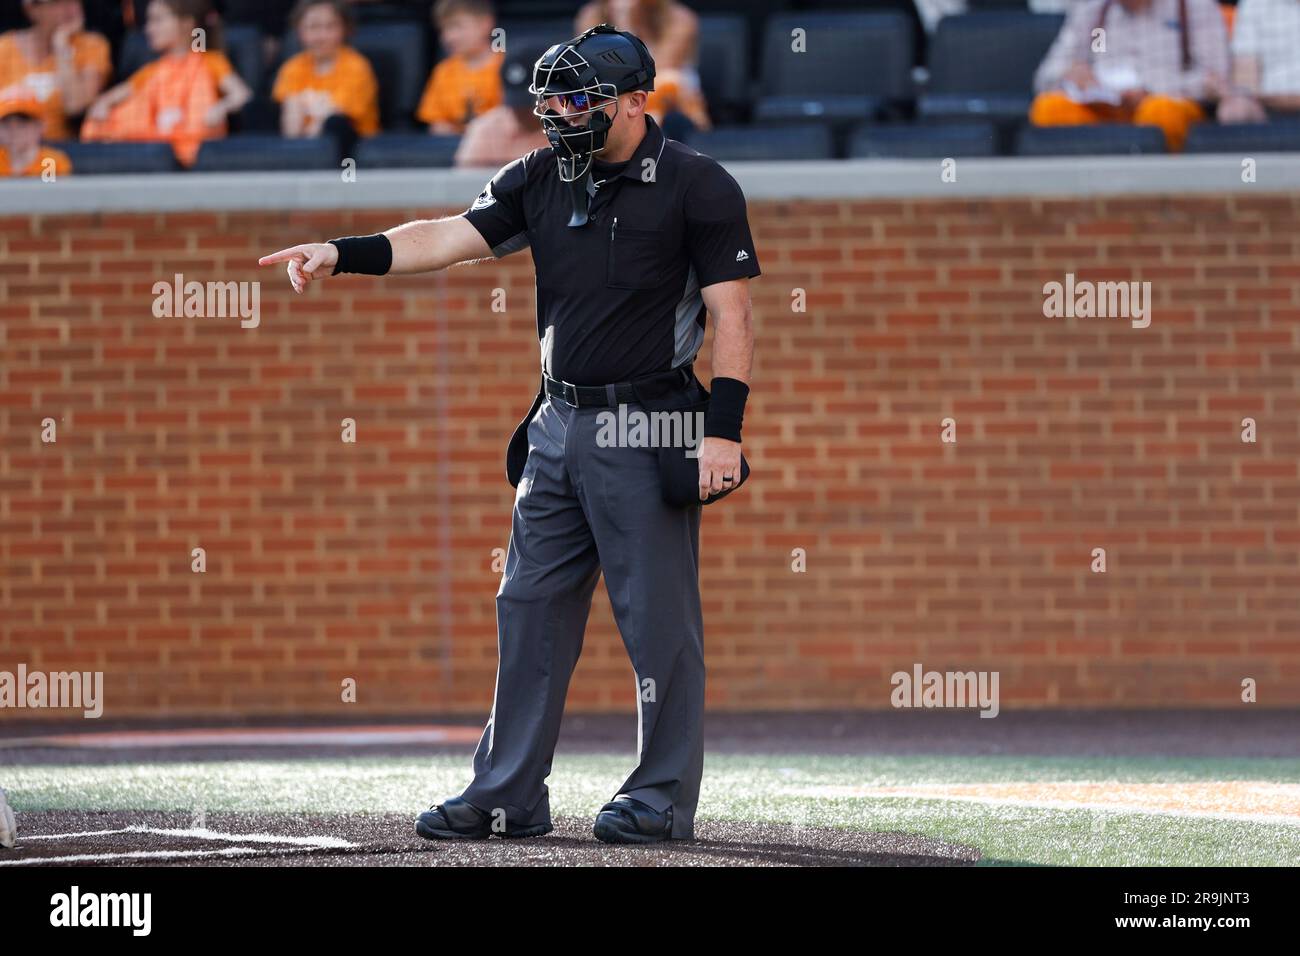 Home-plate umpire Jason Johnson signals to fellow crew members during the game between the Mississippi State Bulldogs and the Tennessee Volunteers on Robert M